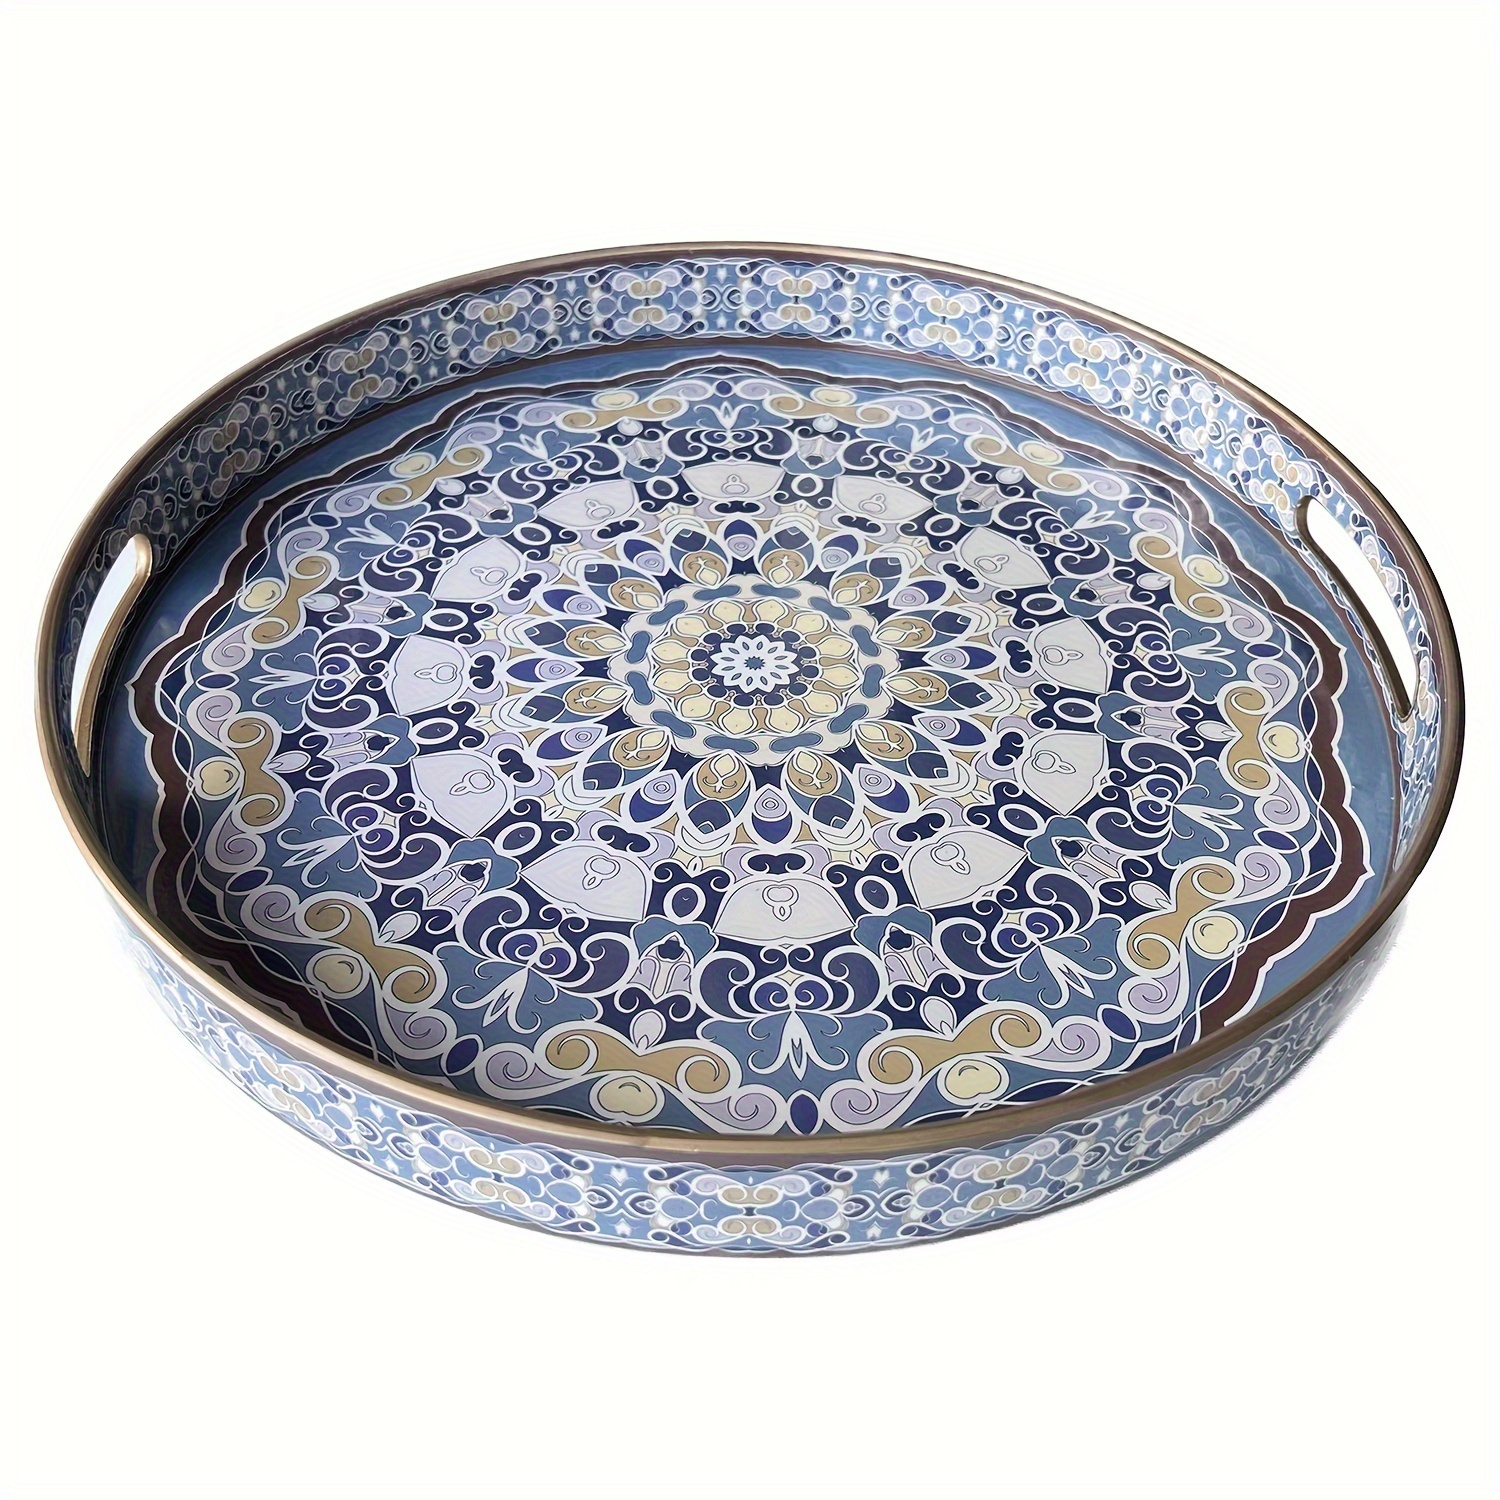 

1pc Round Decorative Tray - Blue Purple Patternm, Marbling Plastic Tray With Handles, Modern Vanity Tray And Serving Tray For Ottoman, Coffee Table, Kitchen And Bathroom, Size 13